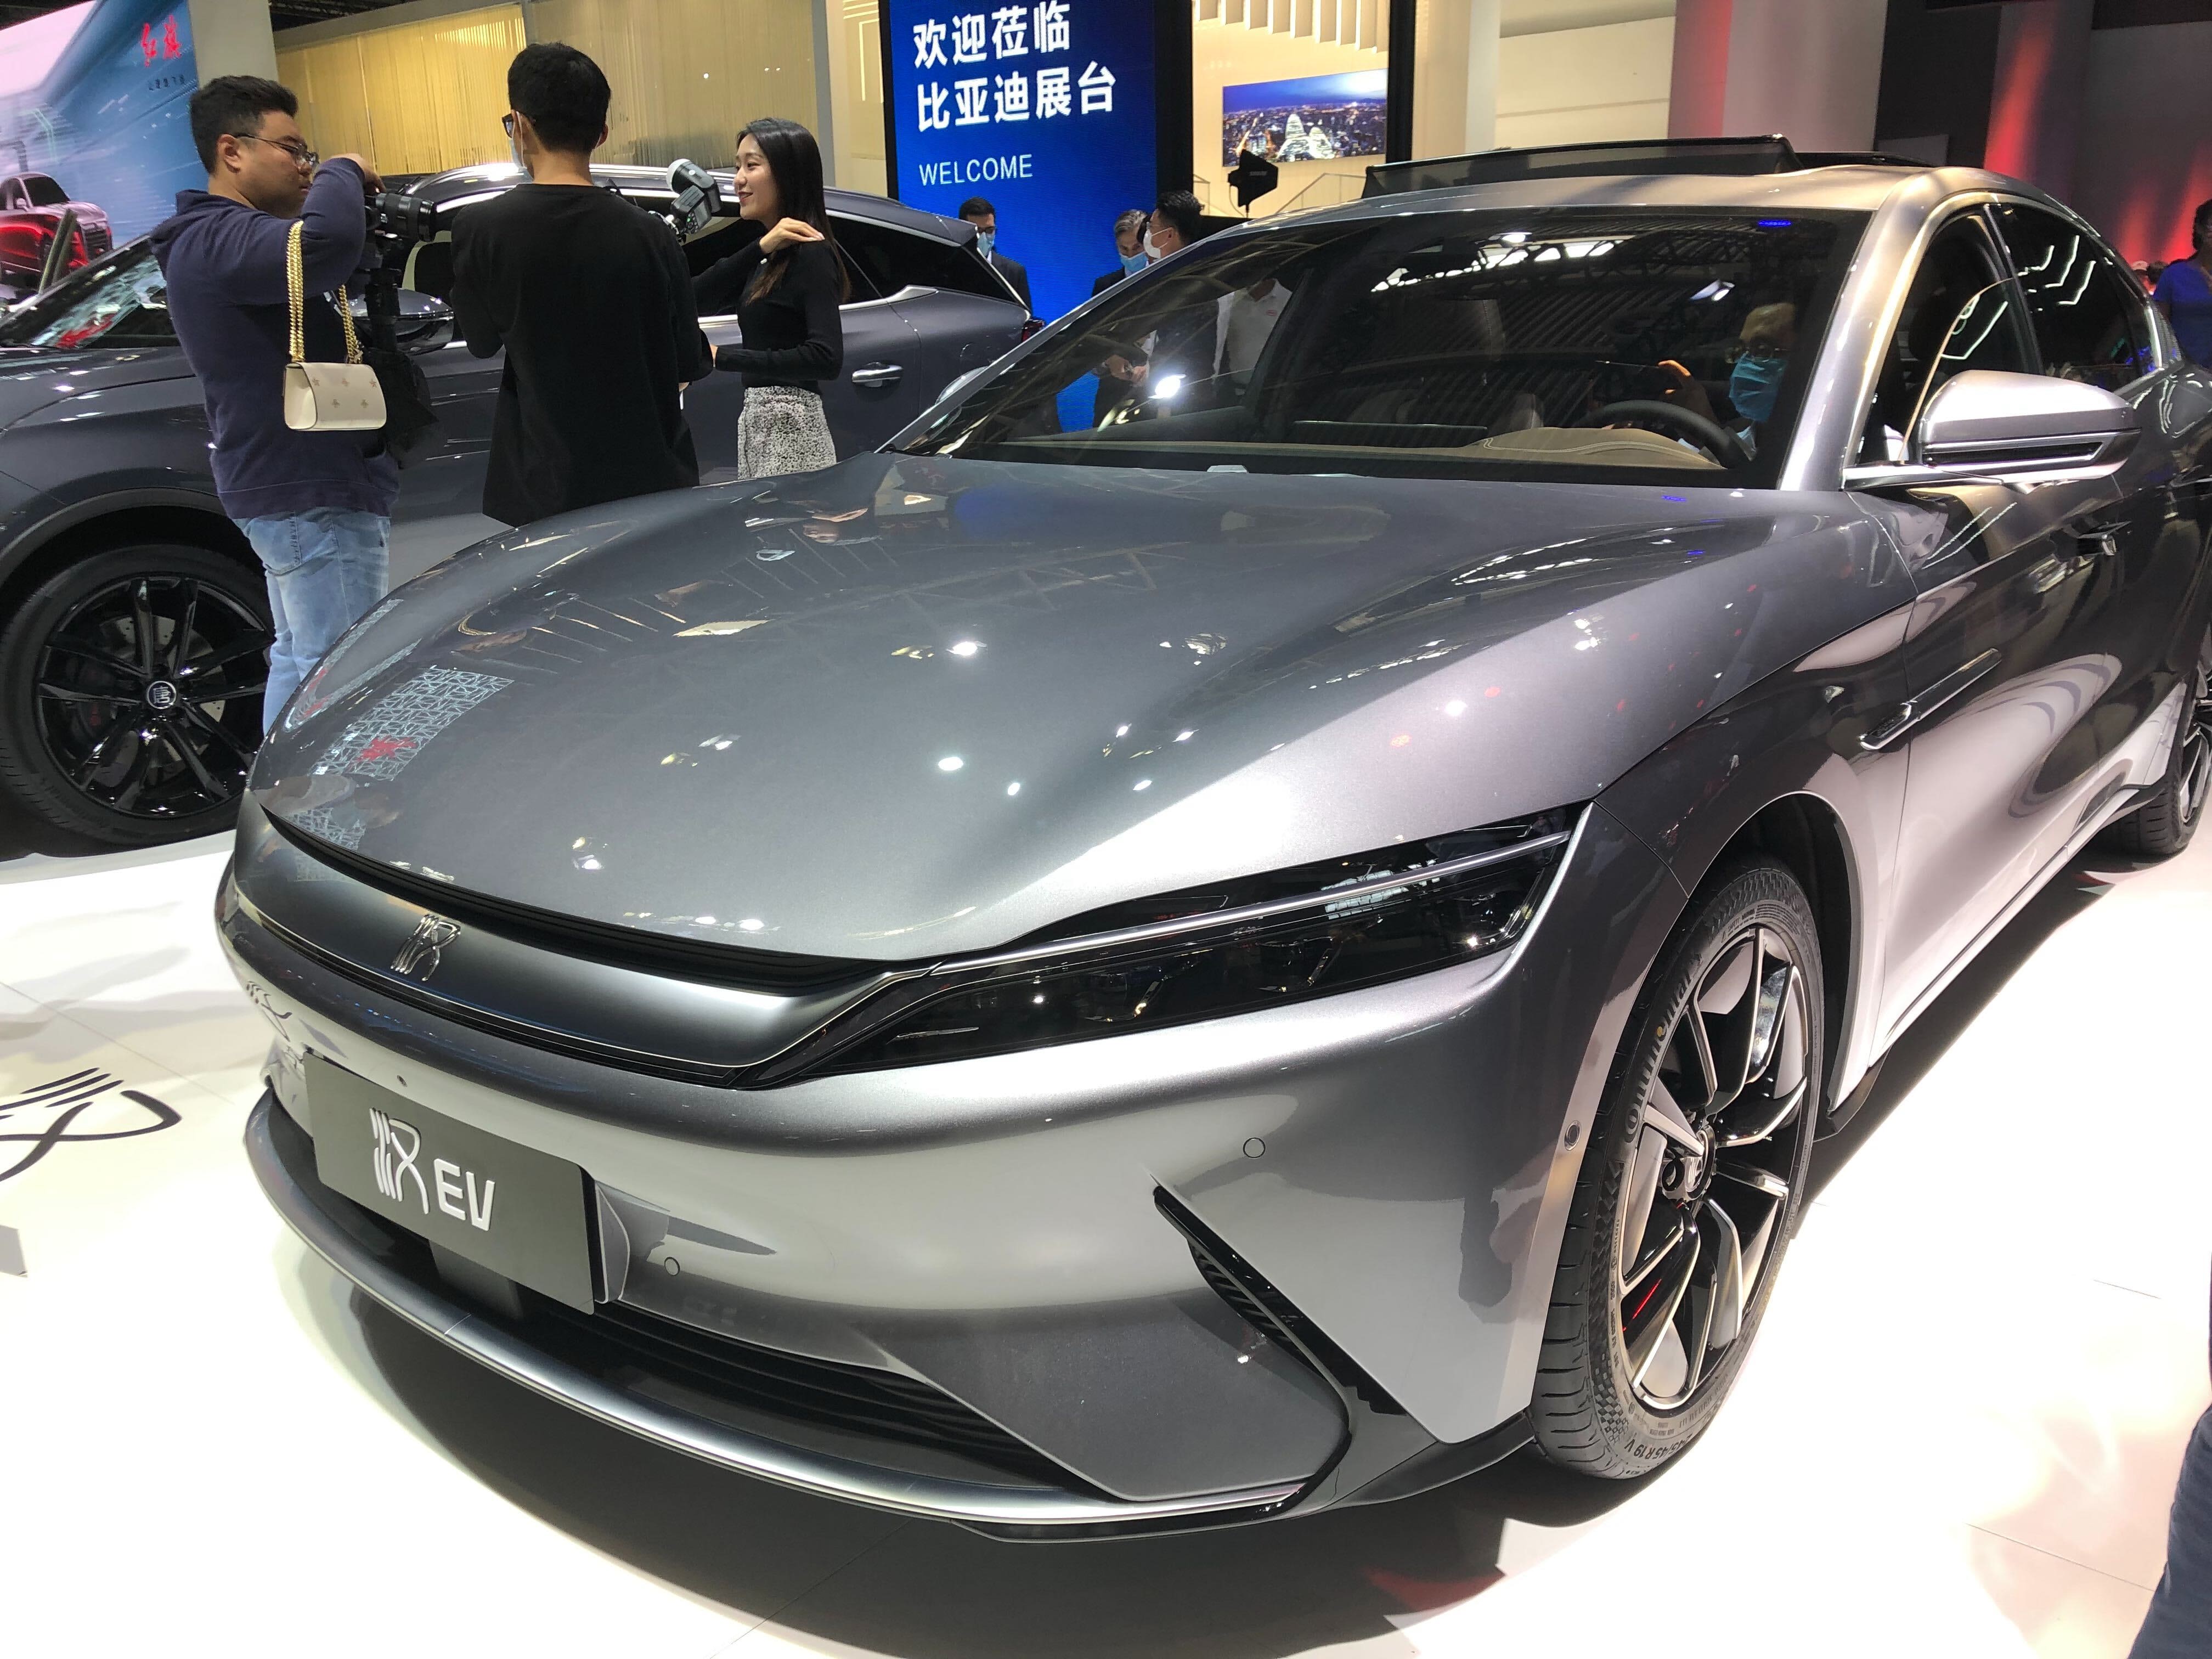 Warren Buffettbacked BYD sells more electric cars March vs Nio Xpeng